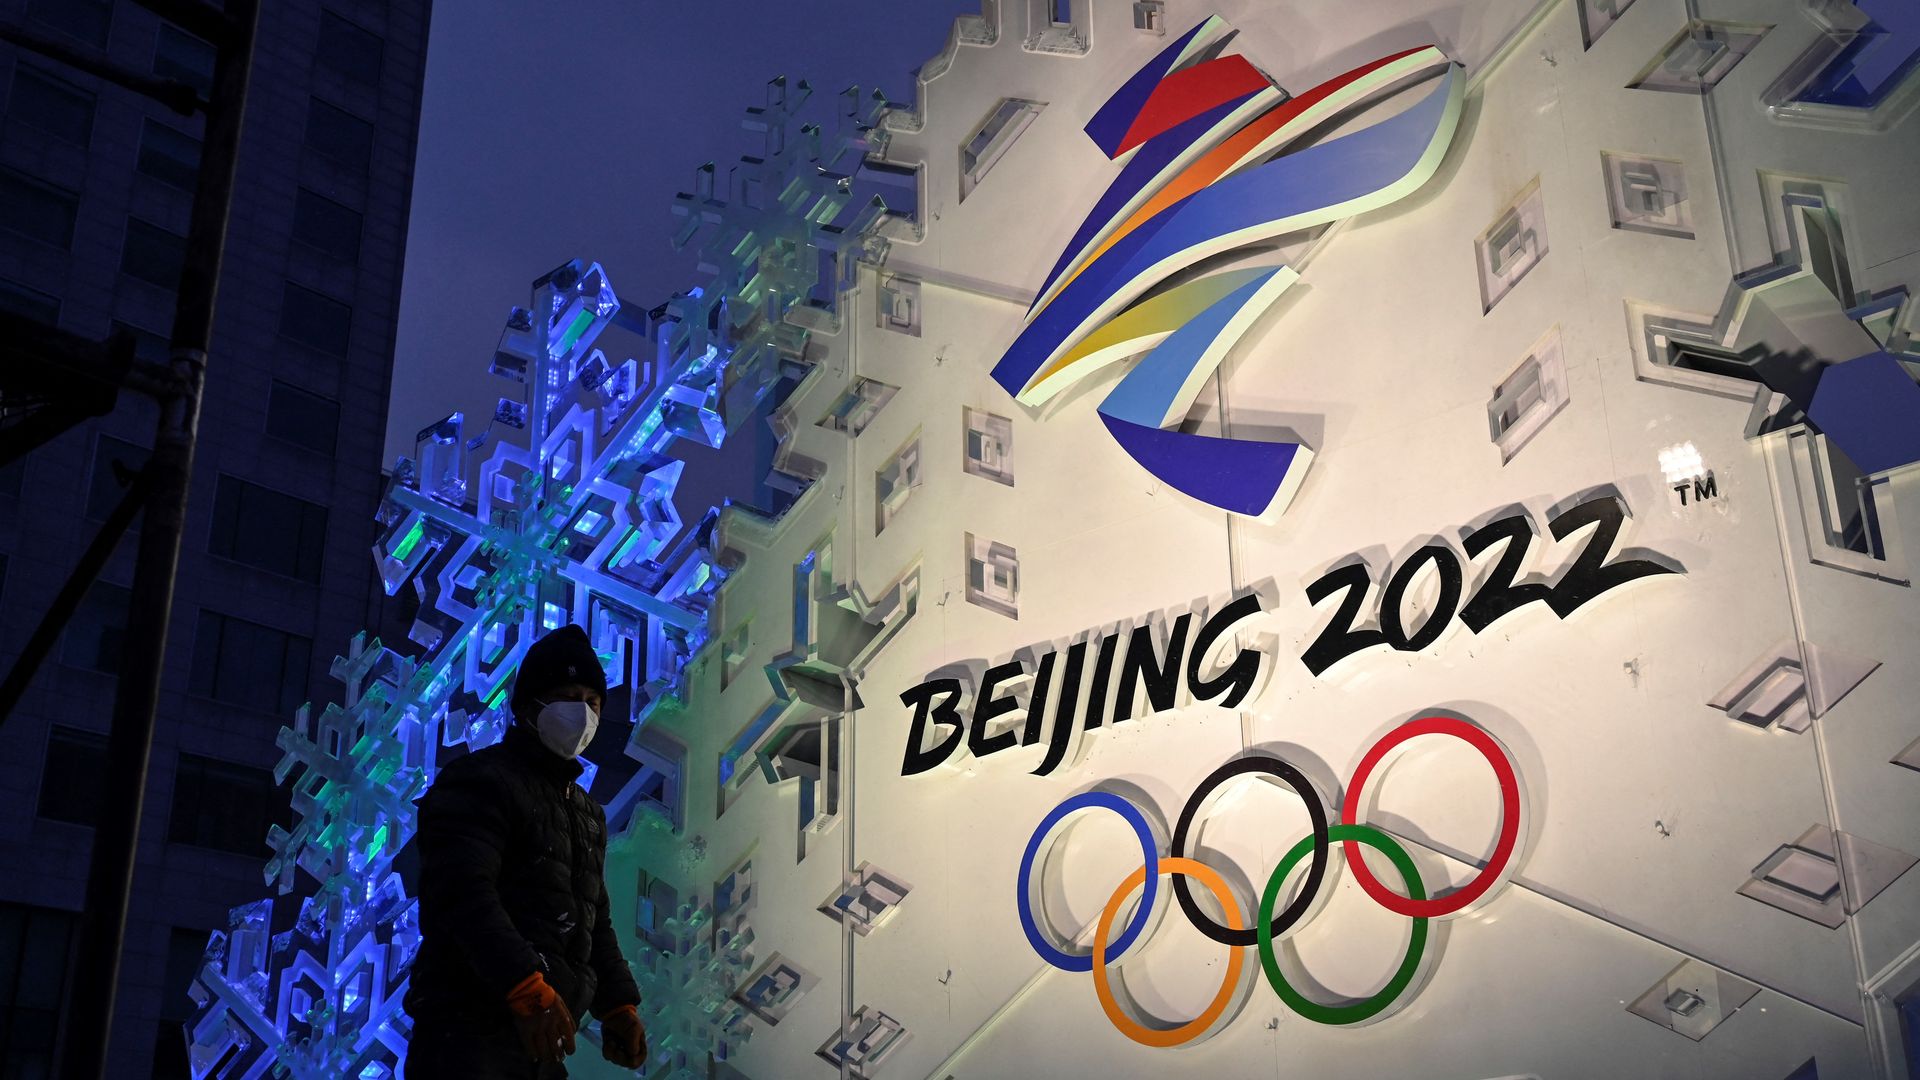 A worker sets up an installation displaying the logo of the Beijing 2022 Winter Olympic Games along a street in Beijing on January 21, 2022.